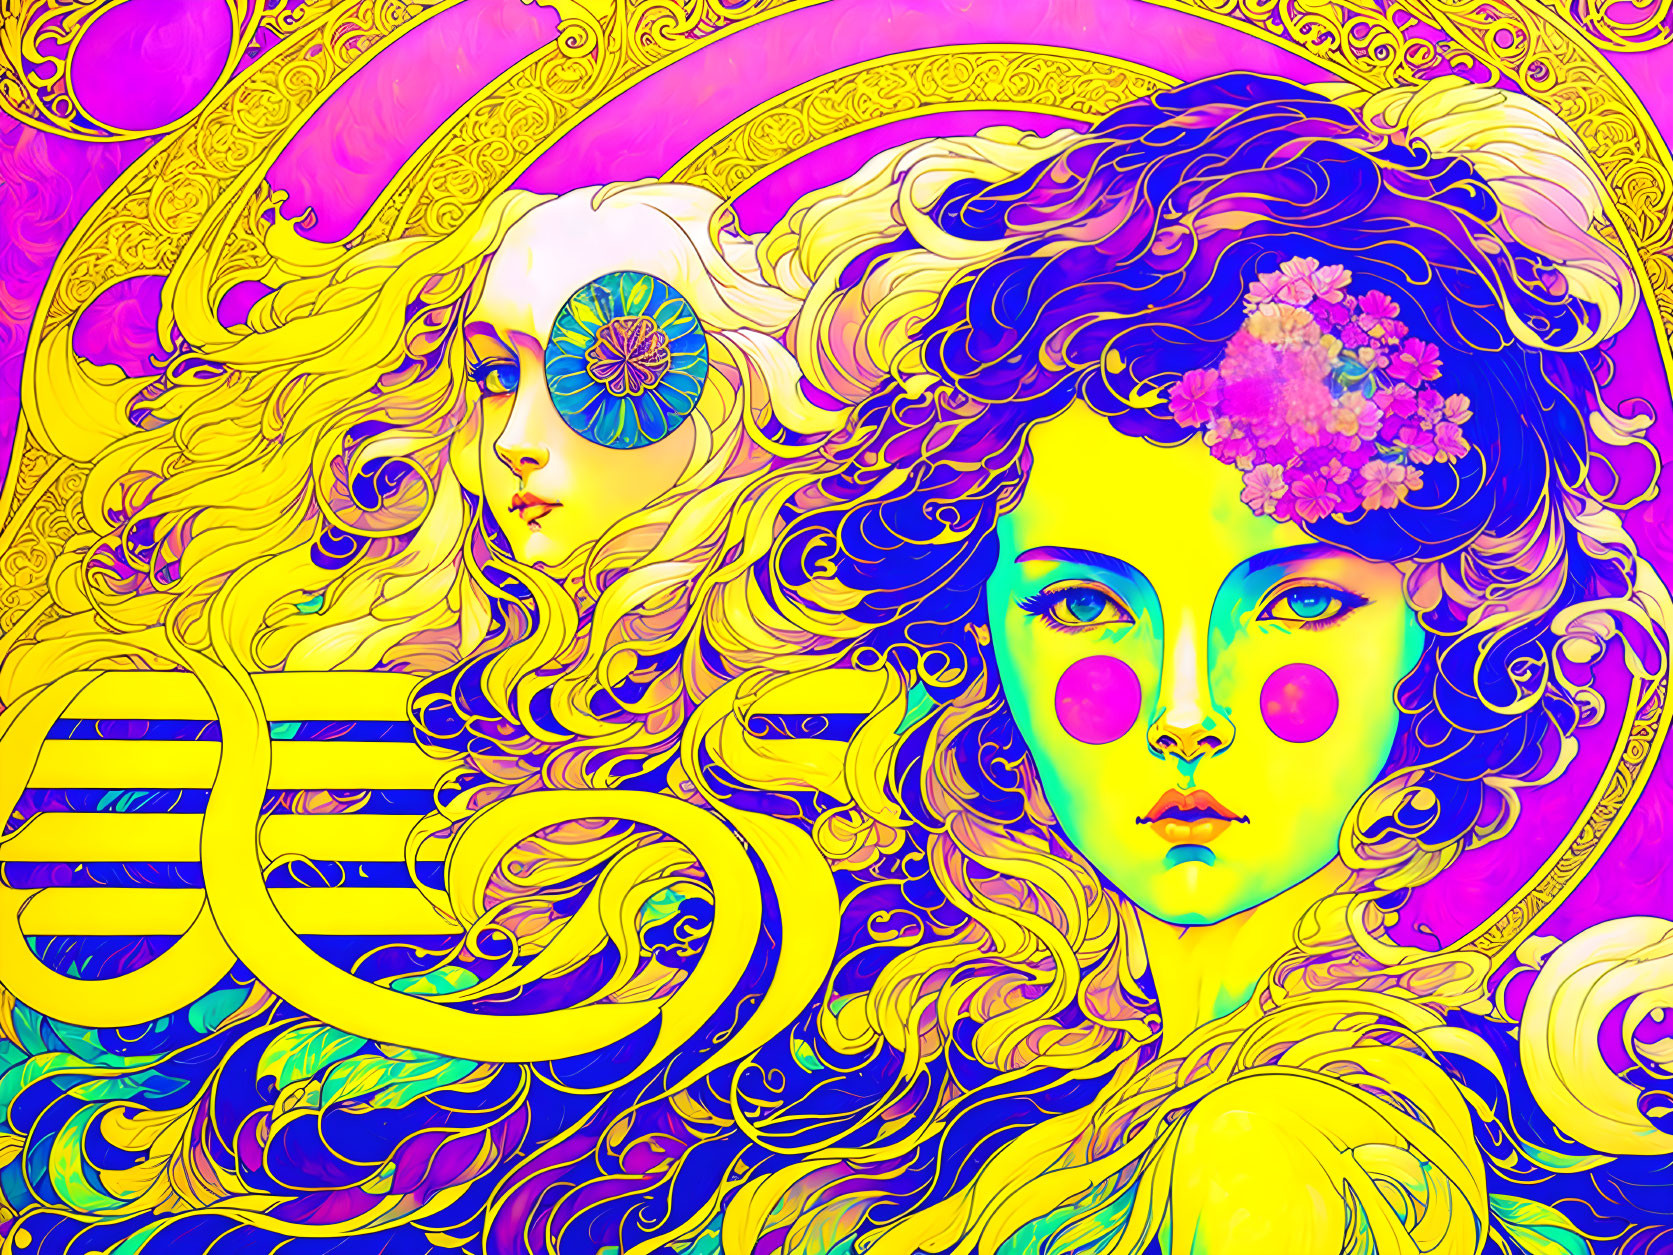 Colorful digital artwork of stylized woman with swirling hair and floral patterns